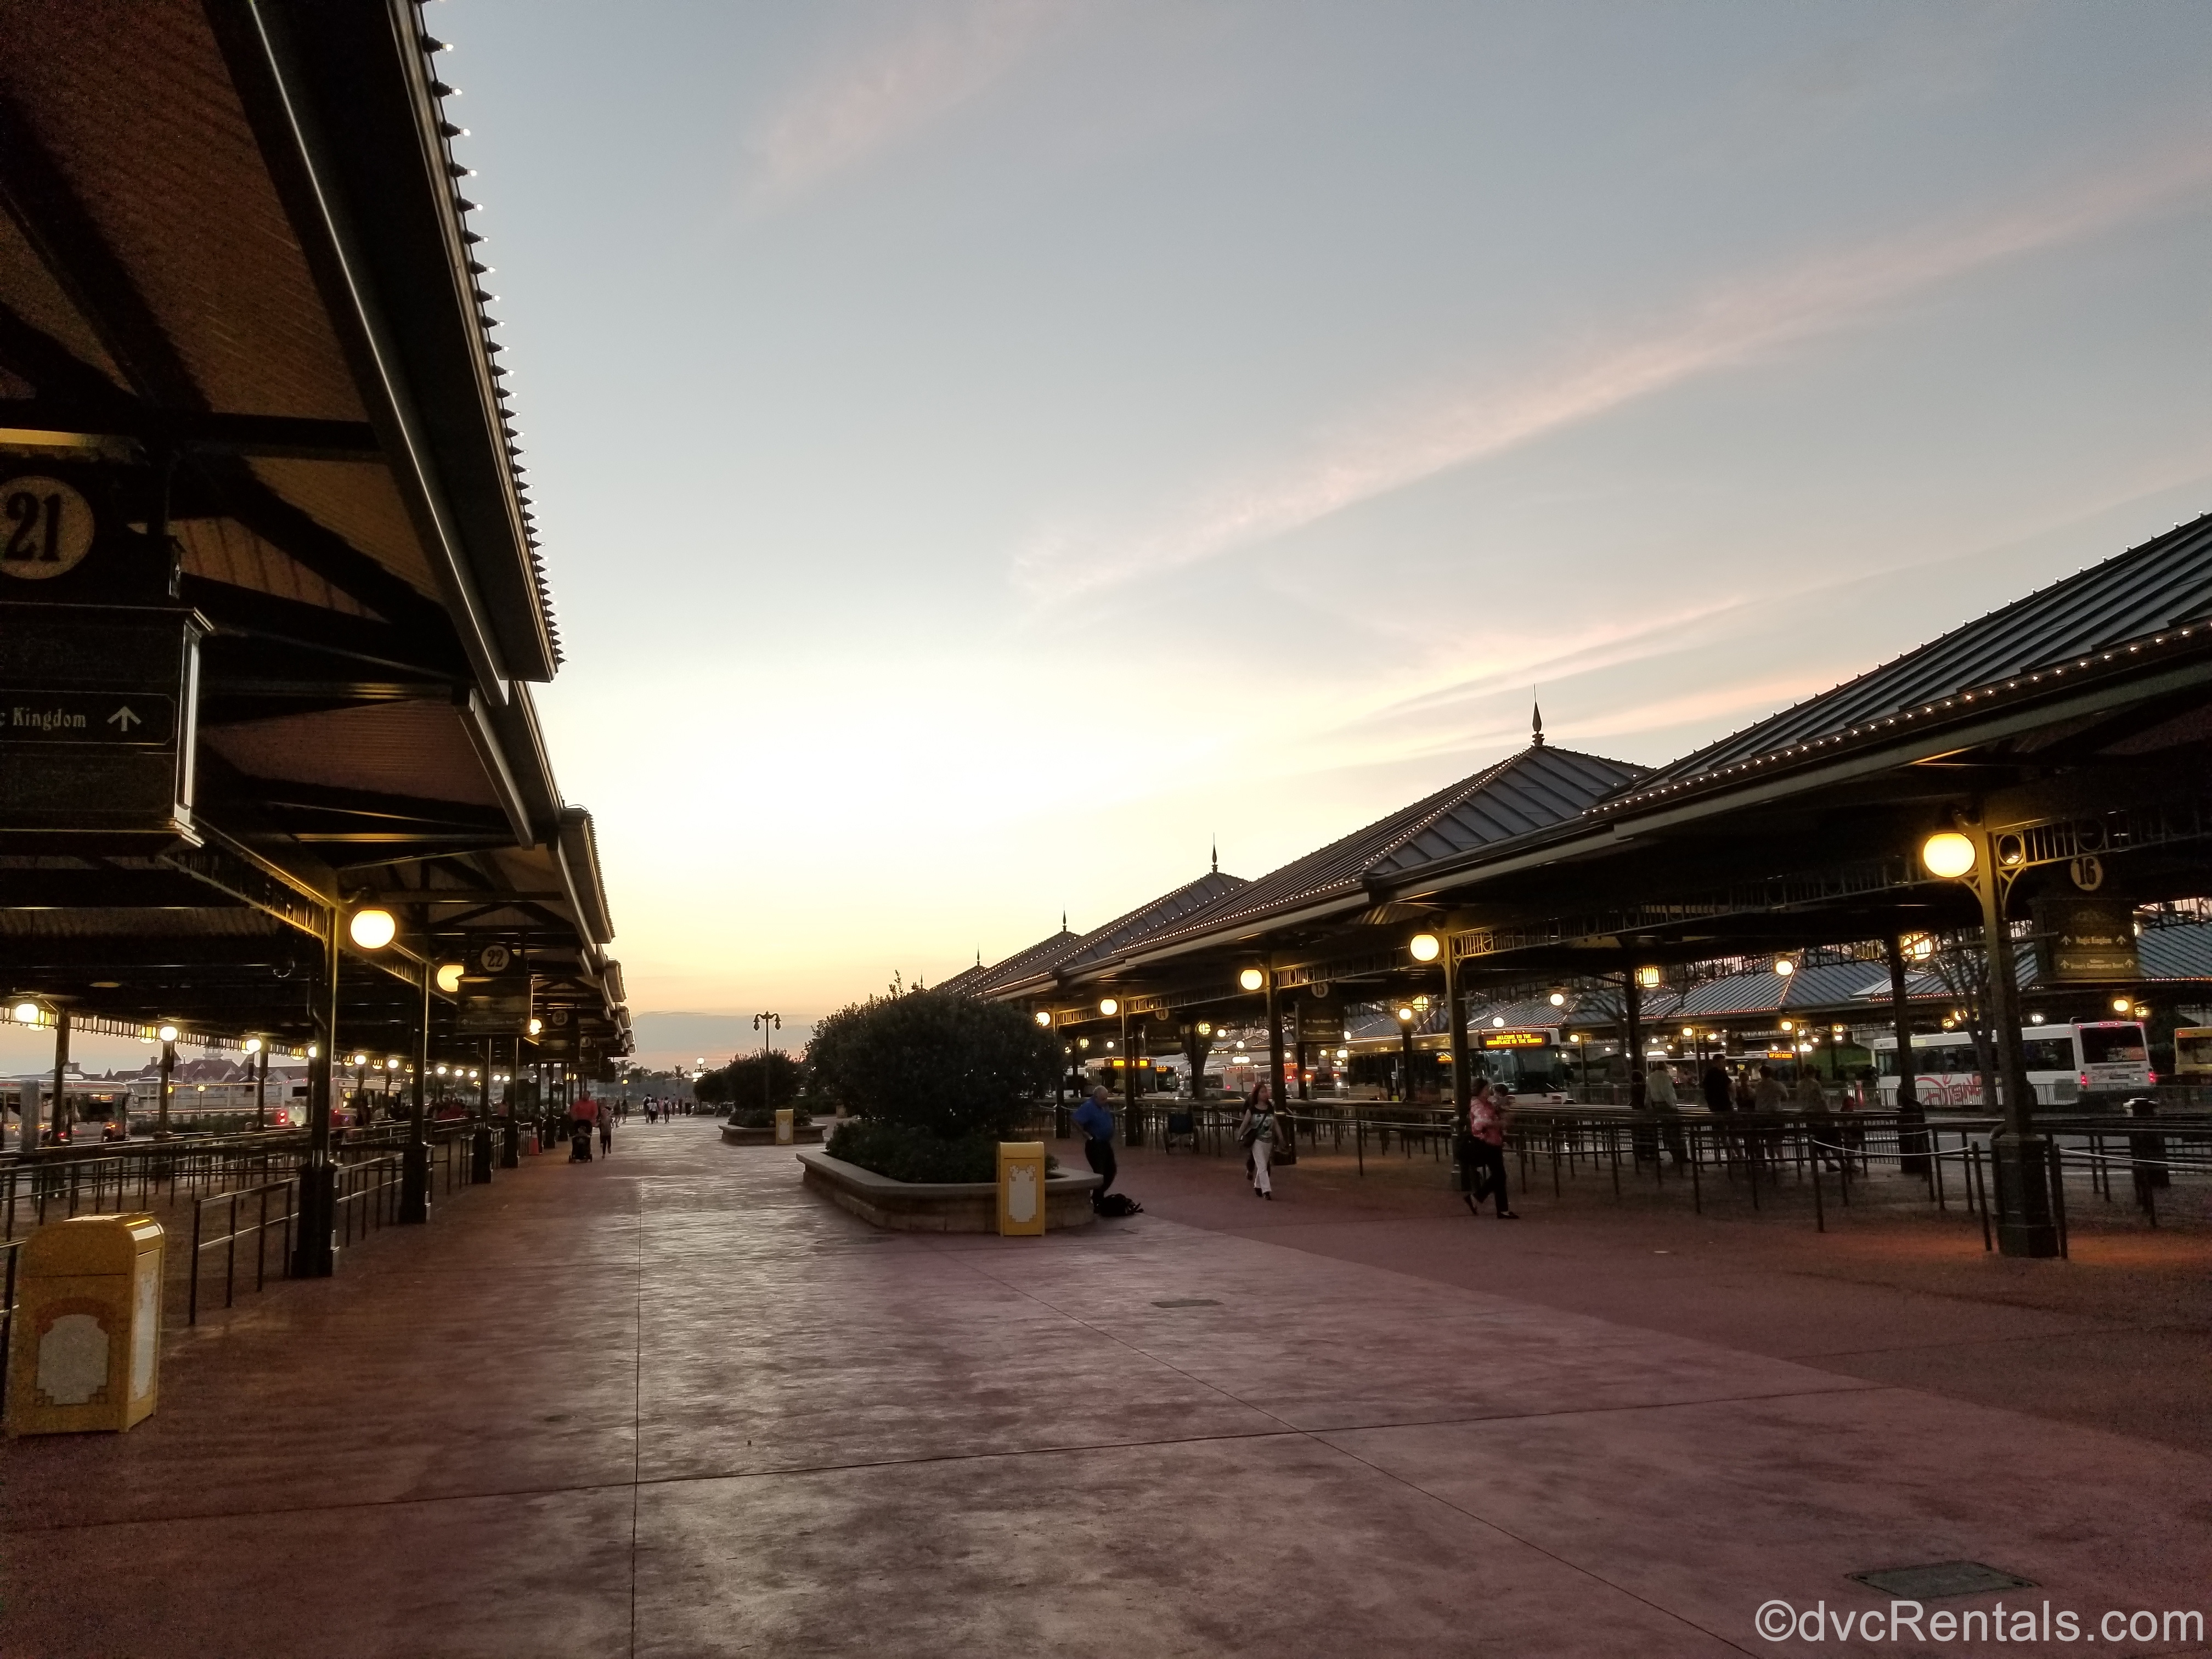 bus stops at the Magic Kingdom with the sunset in the background